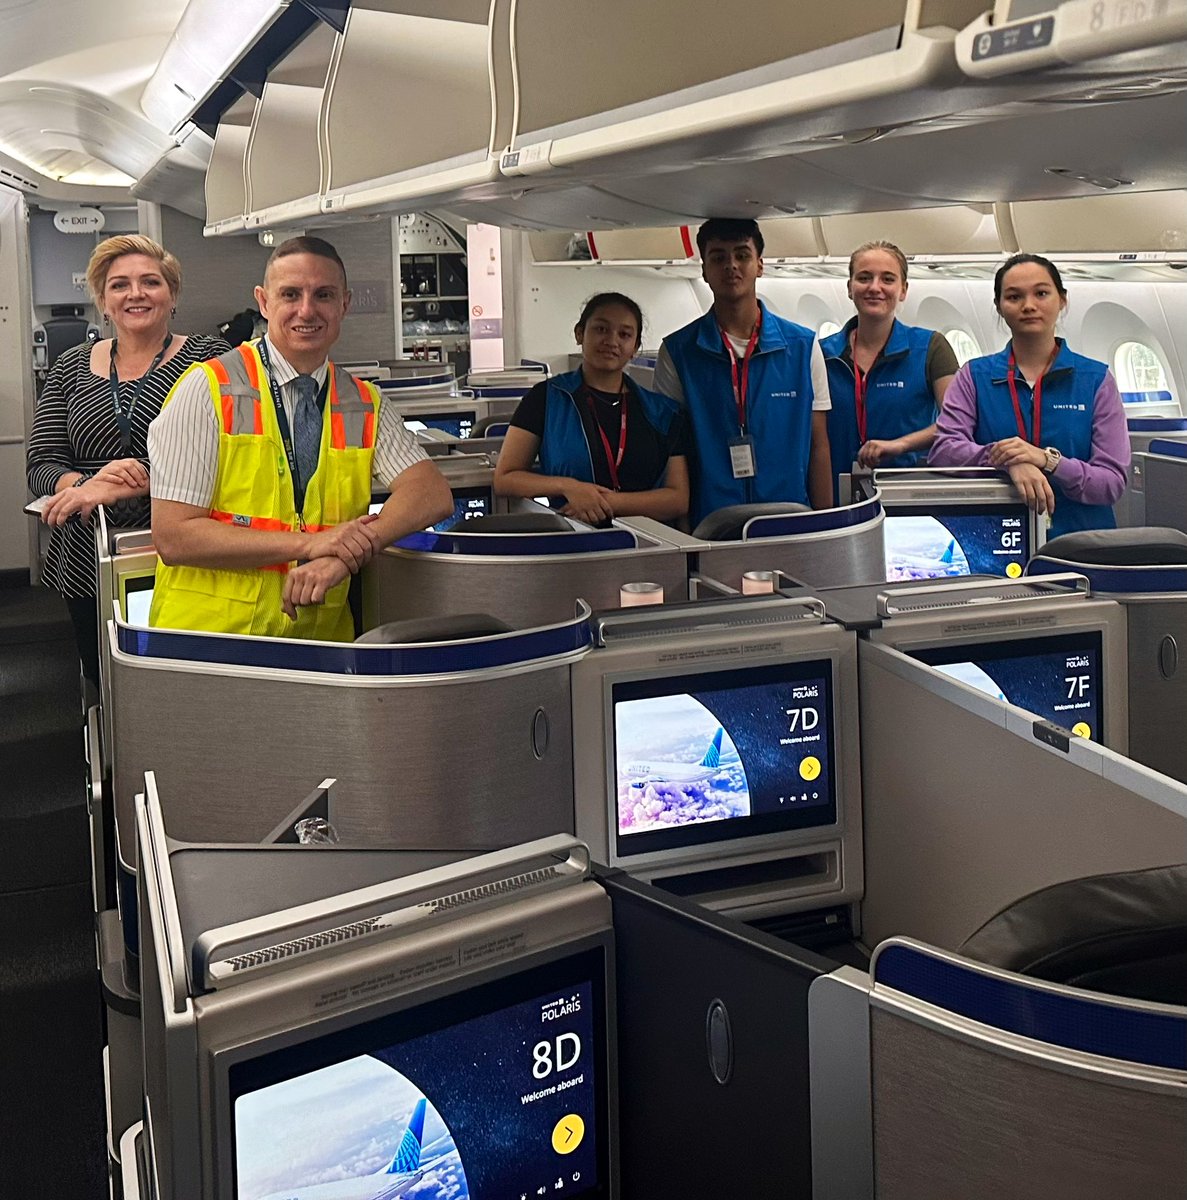 #TeamBNE and our @staralliance partners @SingaporeAir @AirCanada welcomed @aviation_high students this week for an Airport Operations Work Experience insight. Good luck with your continued studies and aviation industry career path! #beingunited #aviation #goodleadstheway